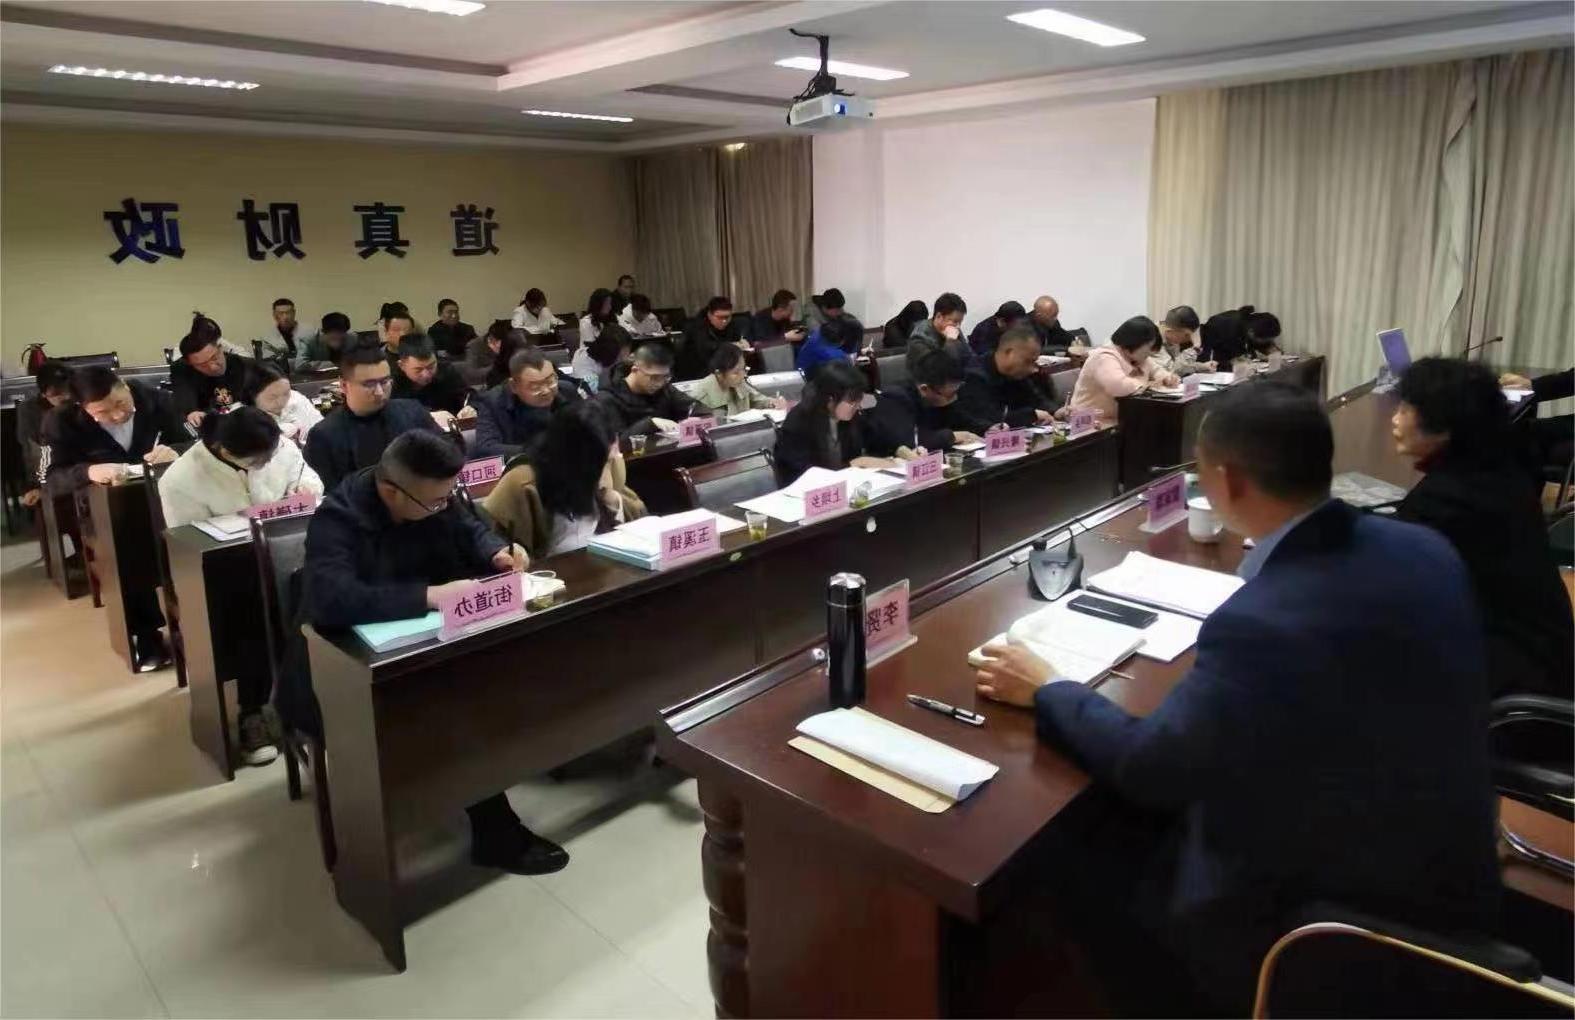 On March 22, 2023, Lei Jiazhang, chairman of our company, organized relevant experts and led a team to the Daozhen County Finance Bureau to conduct on-site training on the financial internal control system for the responsible persons of the 15 hometown (town) finance offices under the Finance Bureau。During the training, the experts explained in detail the internal control methods in the Compilation of Daozhen County's Financial Internal control System, combined with the possible risk control points in the actual work of its relevant staff。Through this training, the relevant staff of Daozhen County Finance Bureau have enhanced their awareness of internal control and shaped good working habits。